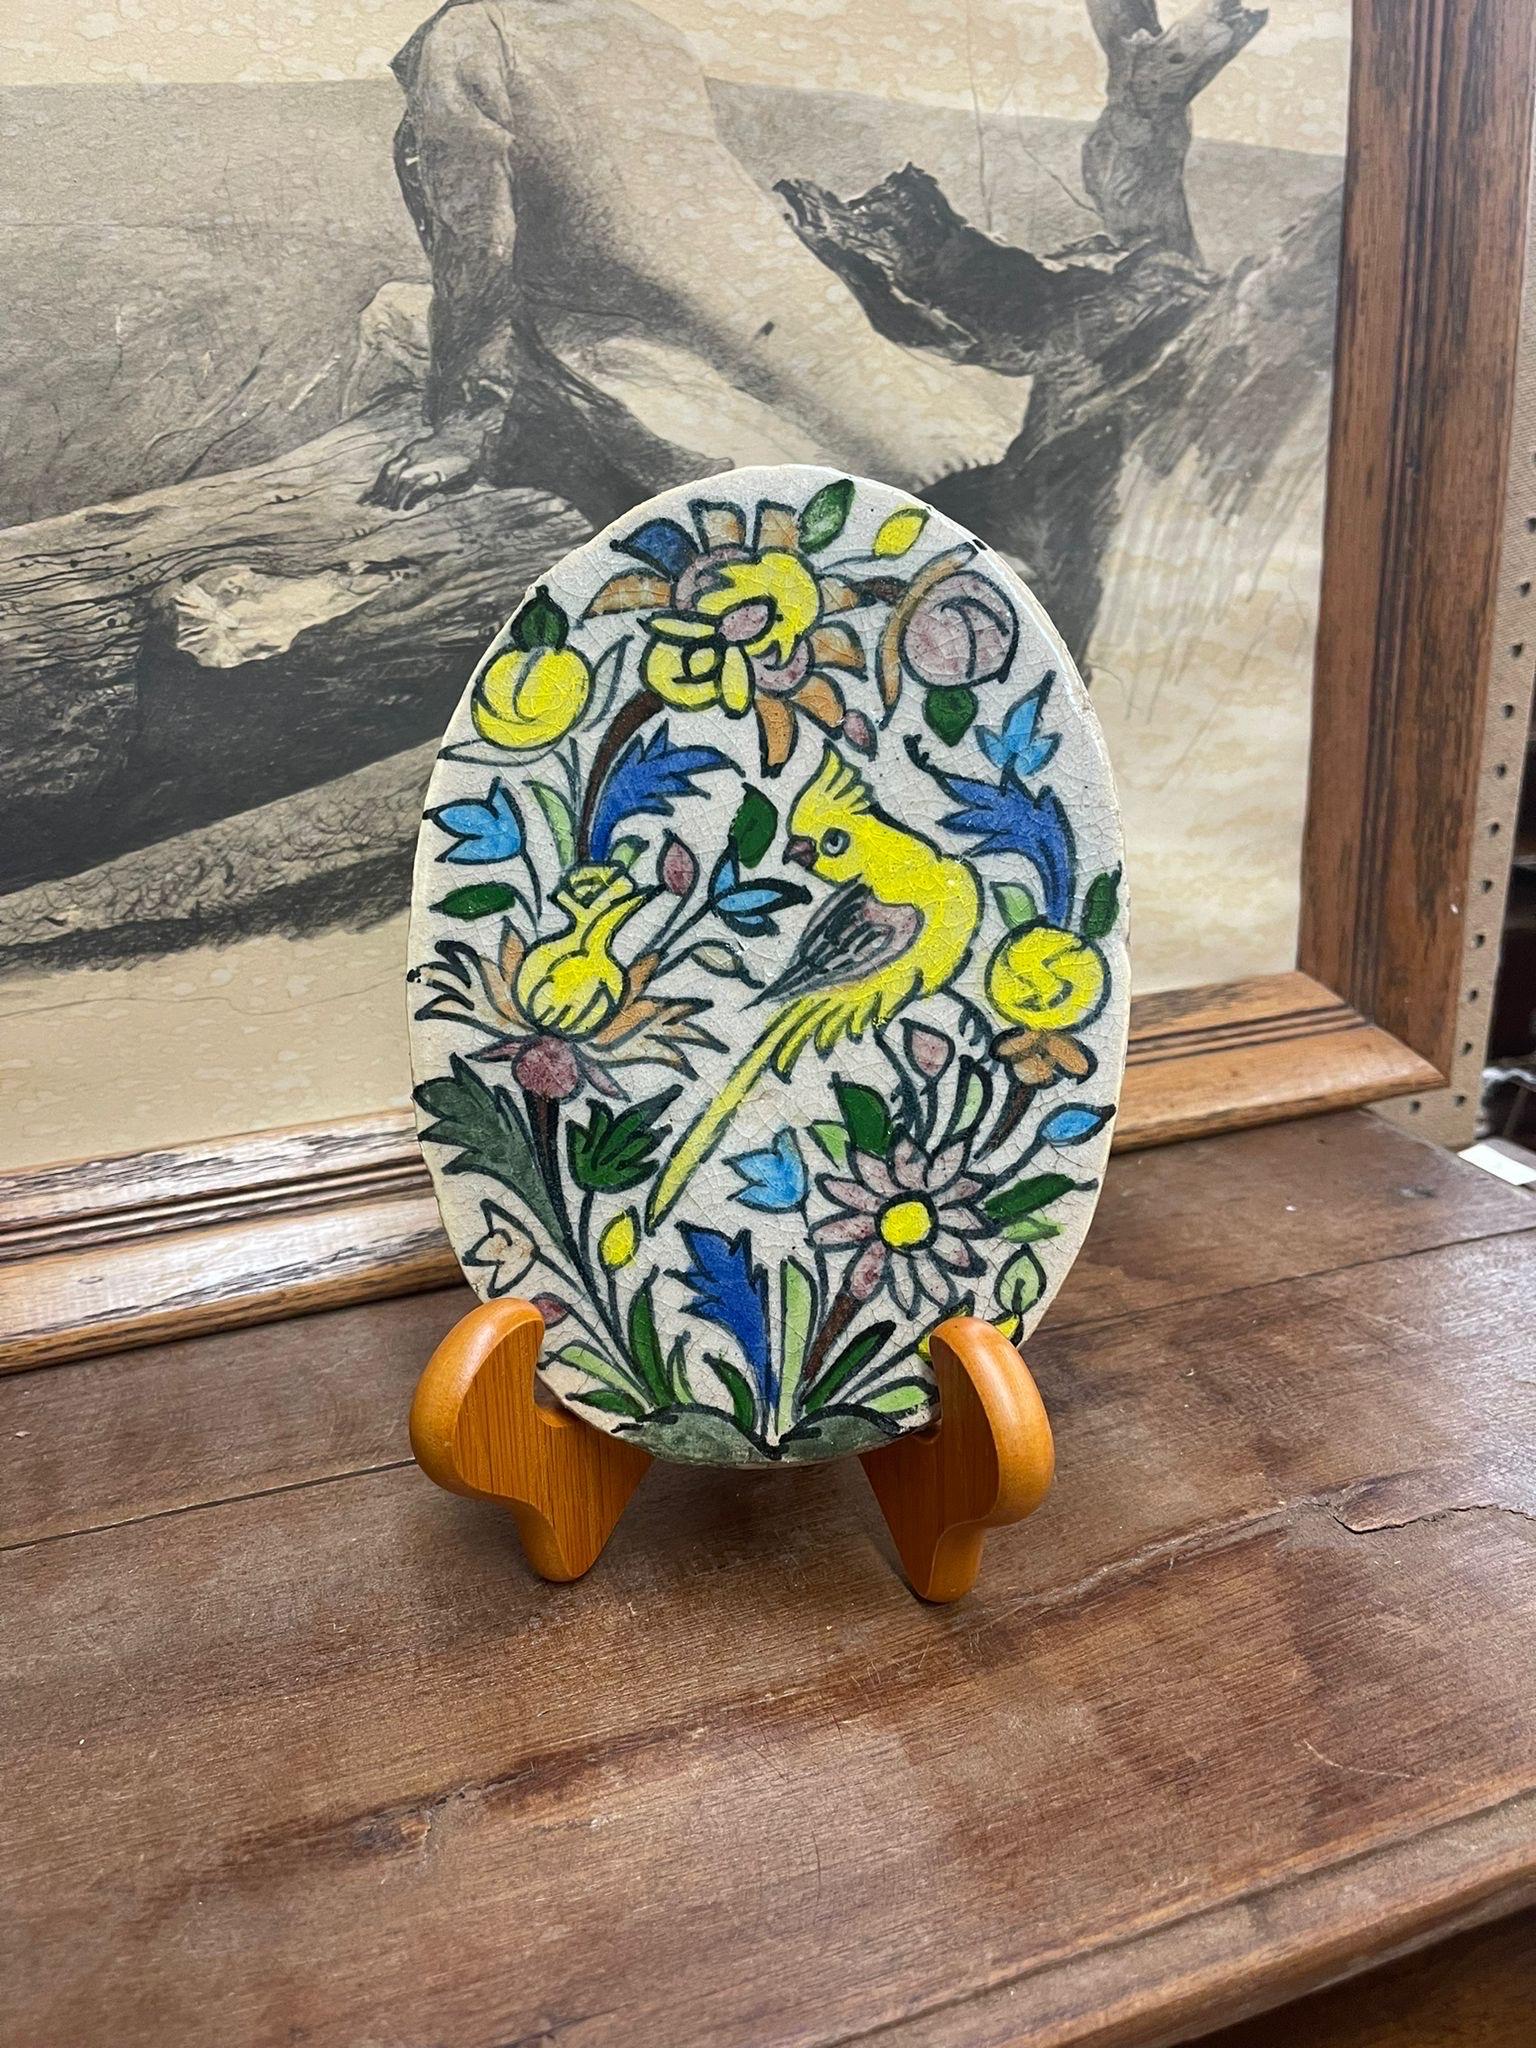 Imported Out of Florence, Italy. Painted Parrot and Floral Image. No Makers Mark. Vintage Condition Consistent with Age as Pictured.

Dimensions. 5 W ; 1/2 D ; 9 H